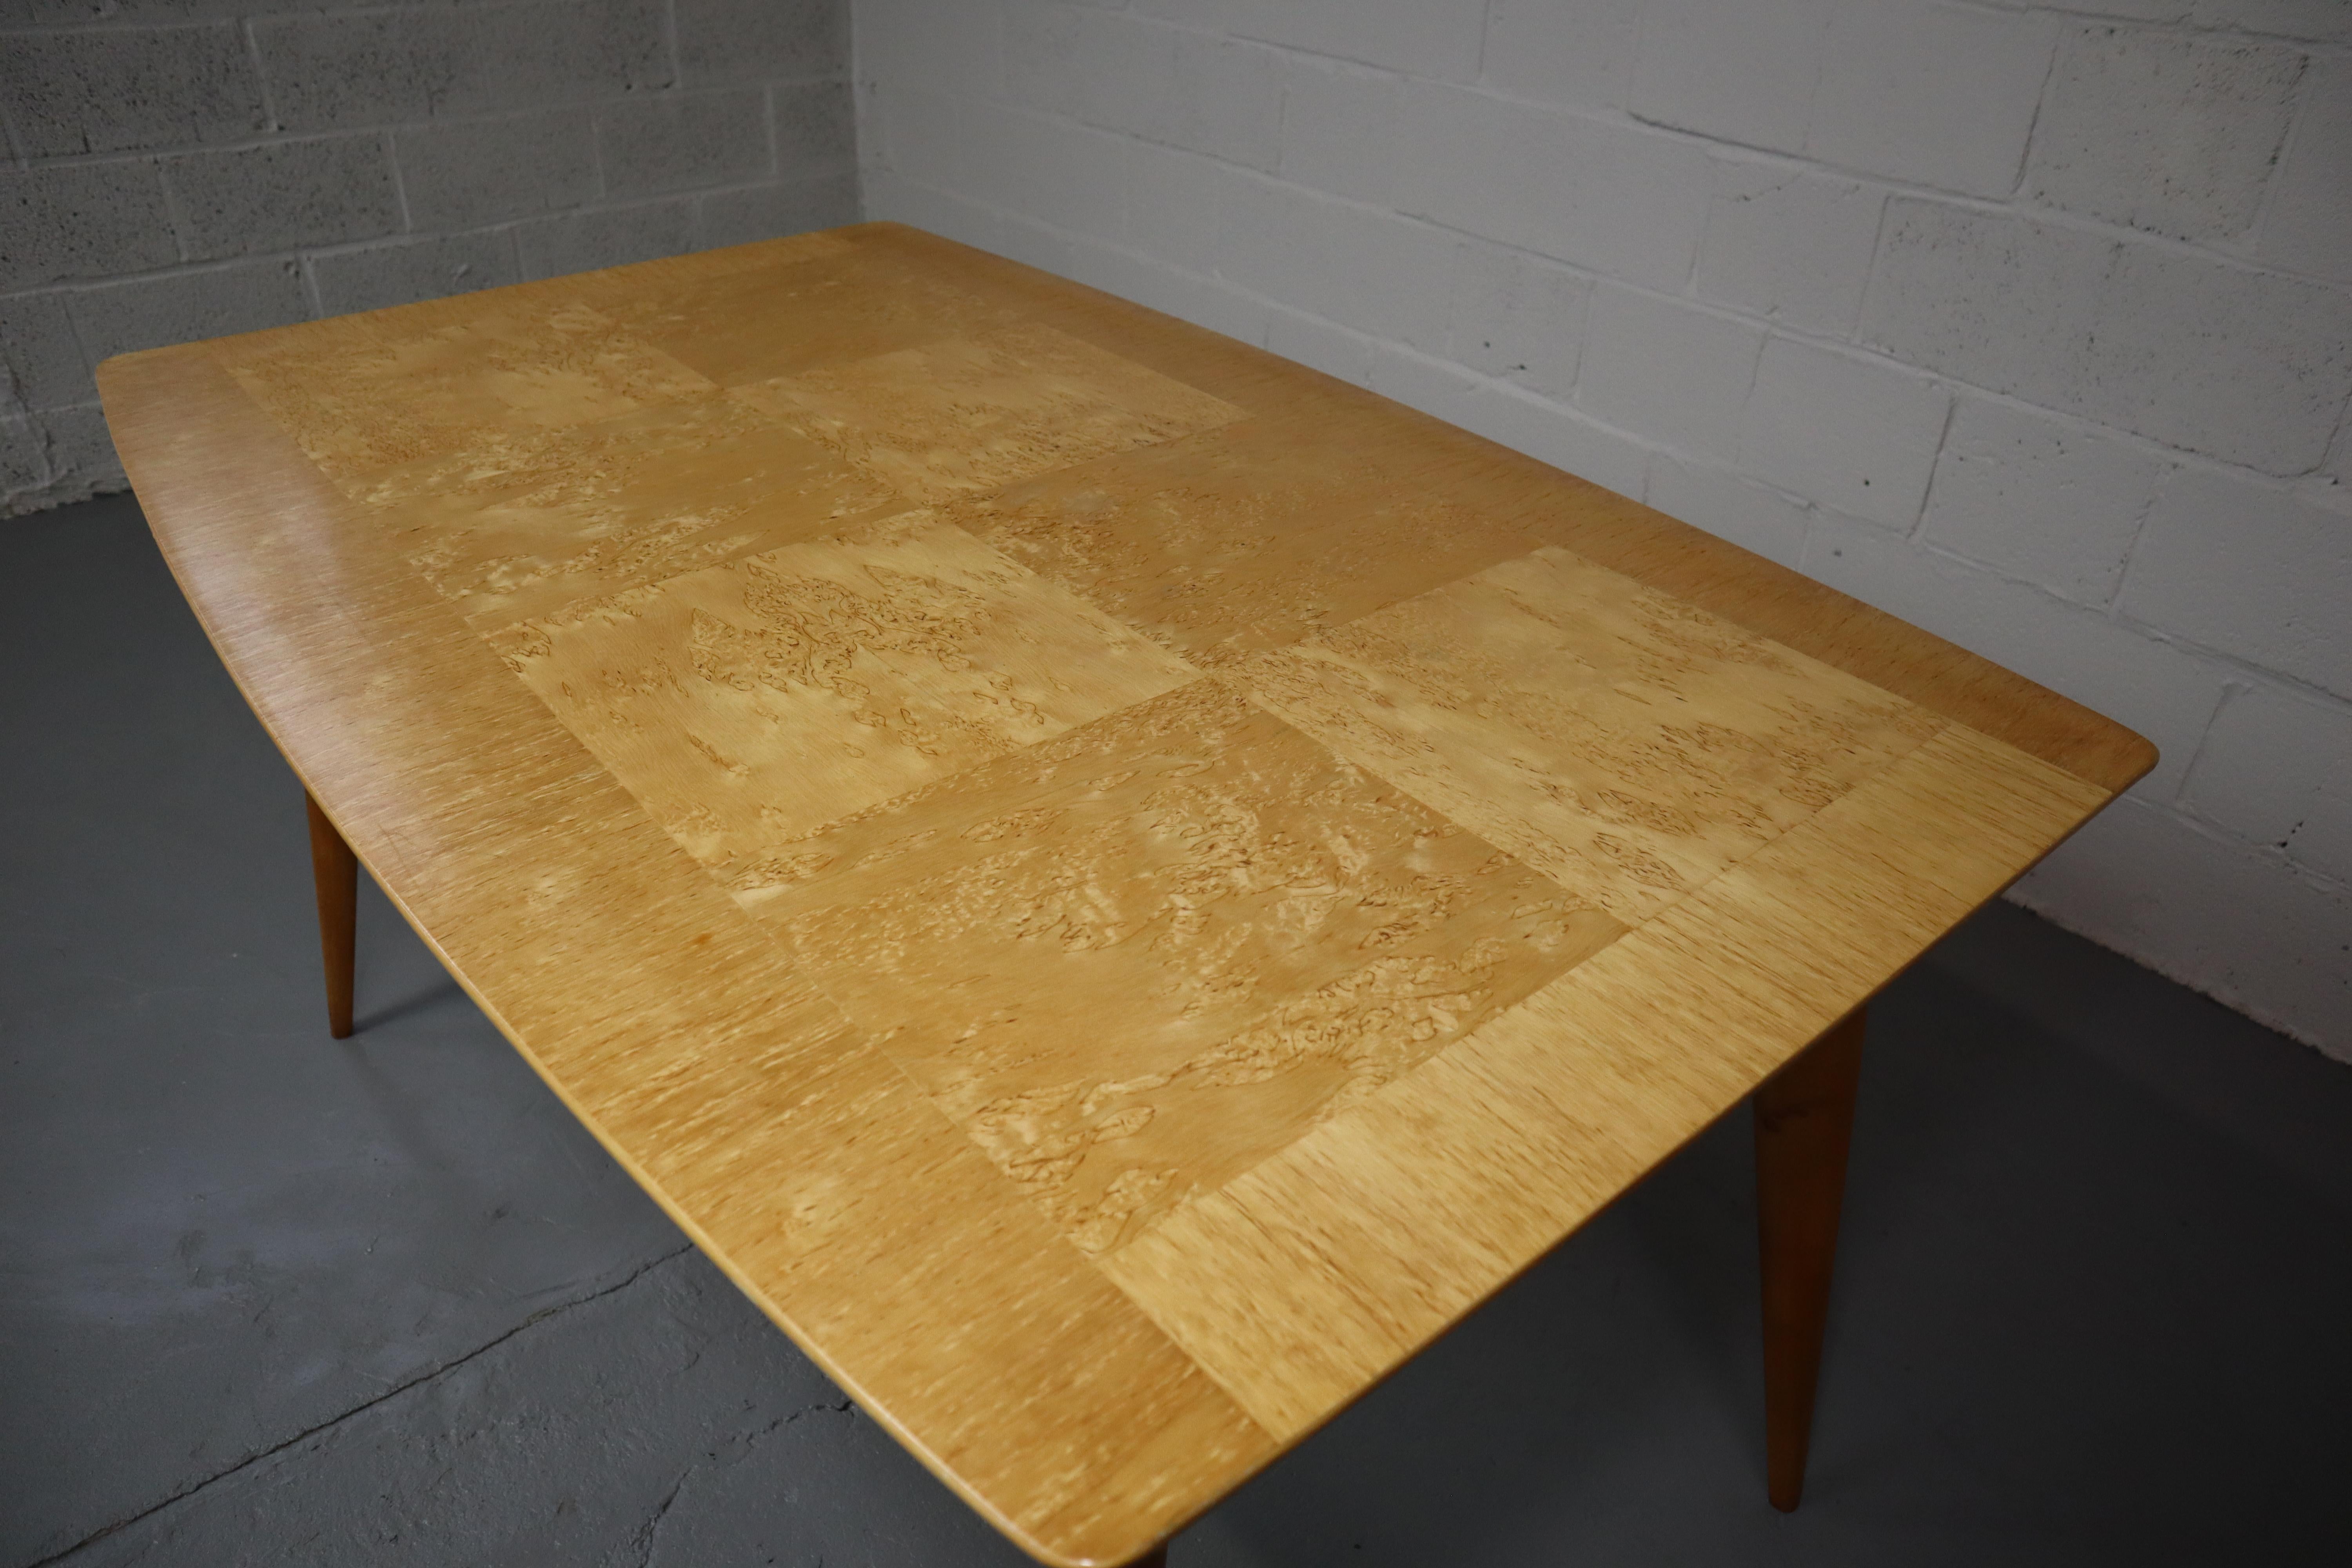 Mid-century Scandinavian dining table in Karelian Birch.
This table is made of birch wood. The table top is made of Karelian birch veneer (also called Curly Birch).
This variety of the common Birch has a genetic defect that causes the tree to have